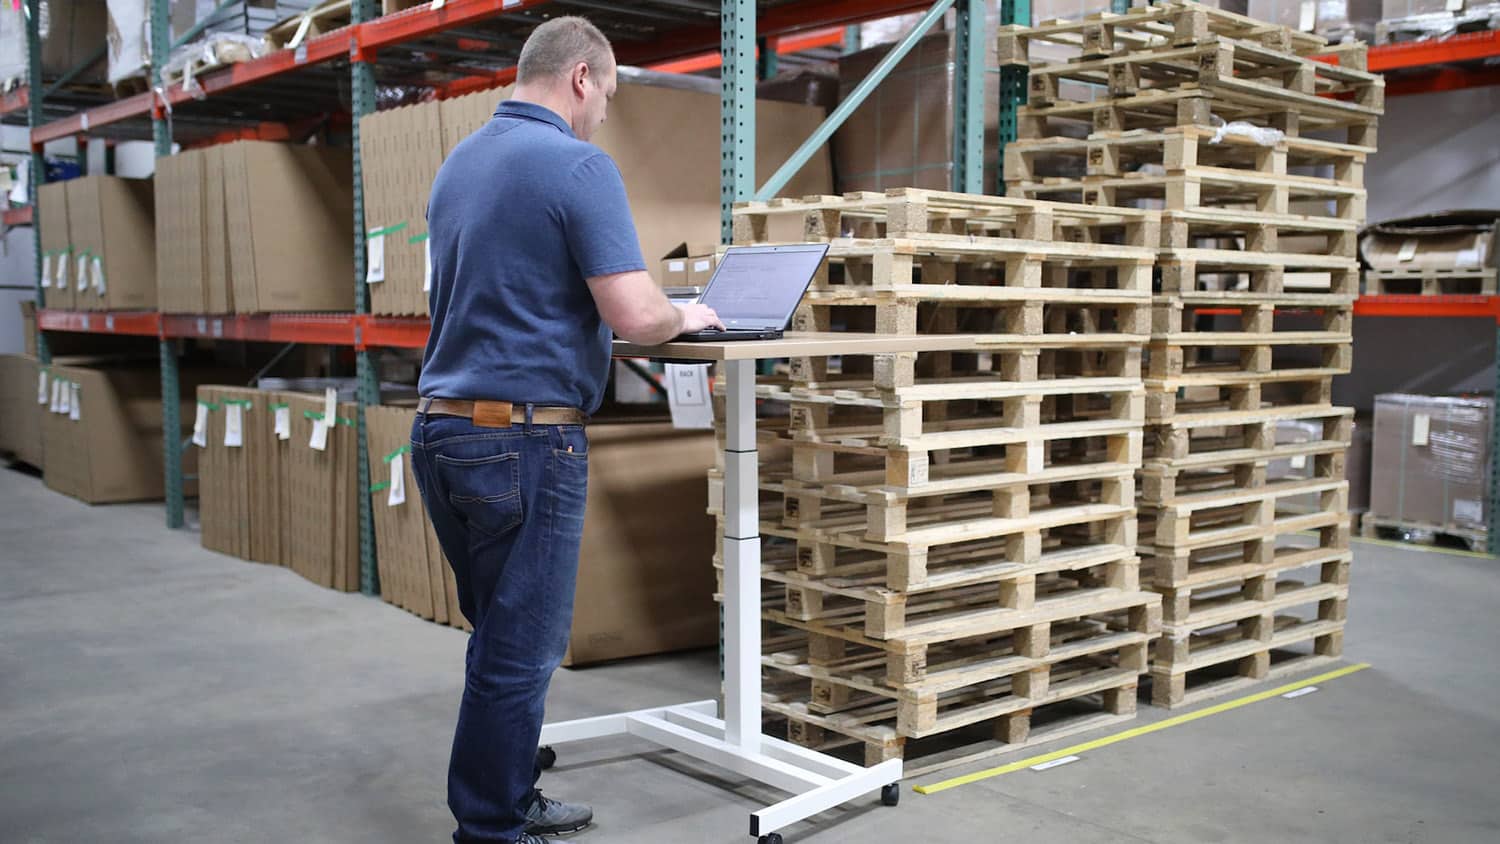 Man in a shipping warehouse looks at a laptop computer.